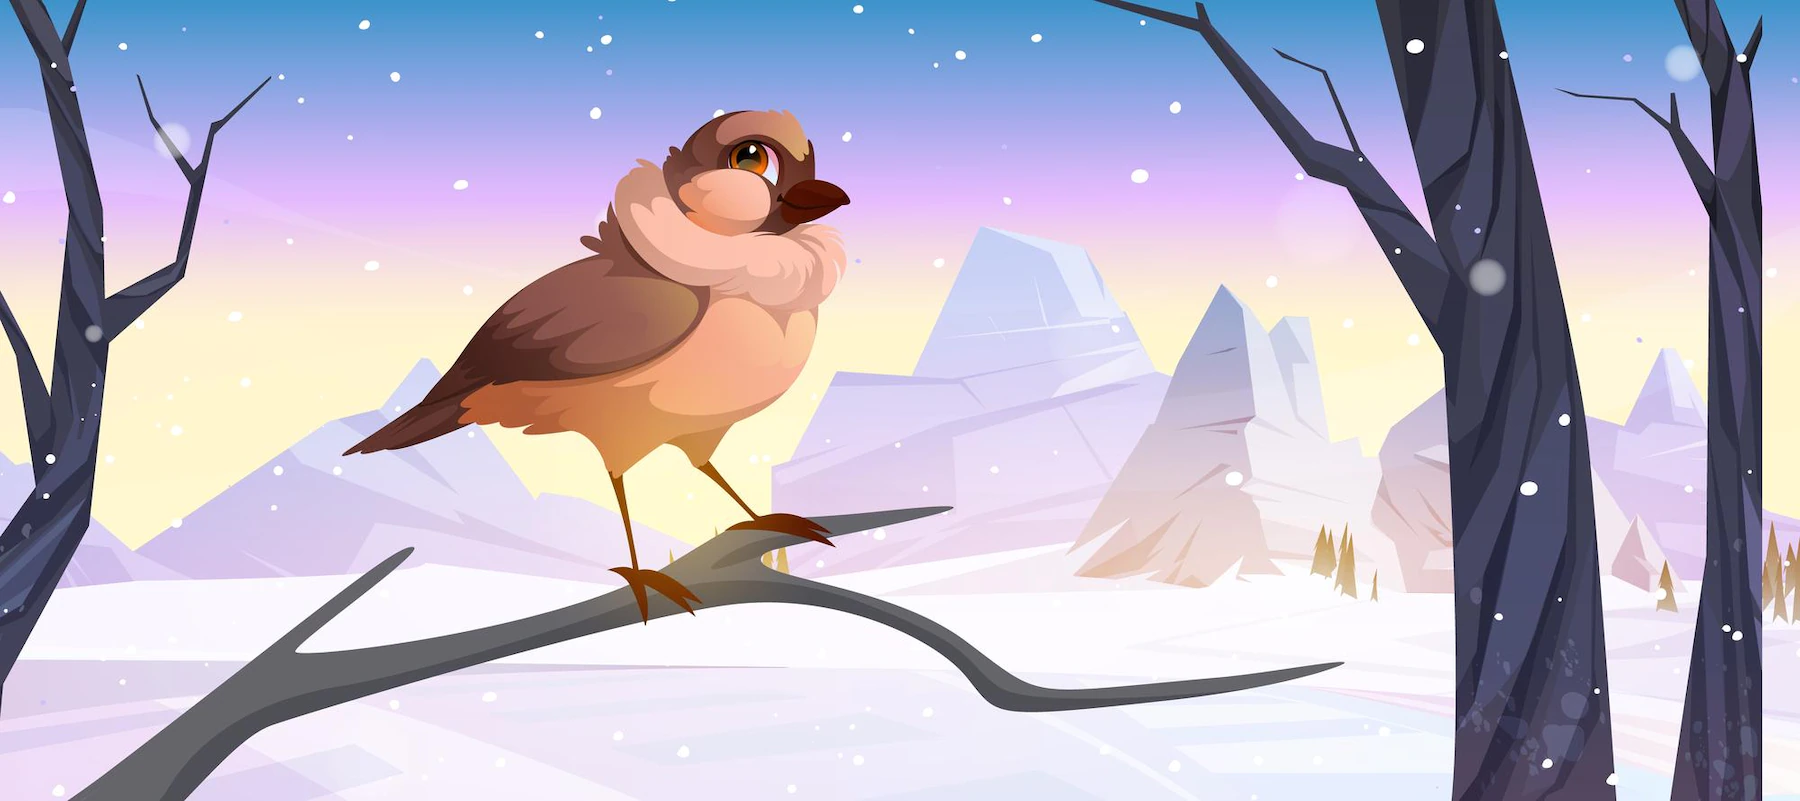 cartoon sparrow bird sitting branch wild nature wintertime background with falling snow bare trees mountain peaks cute birdie with brown feathers winter landscape vector illustration 107791 11583